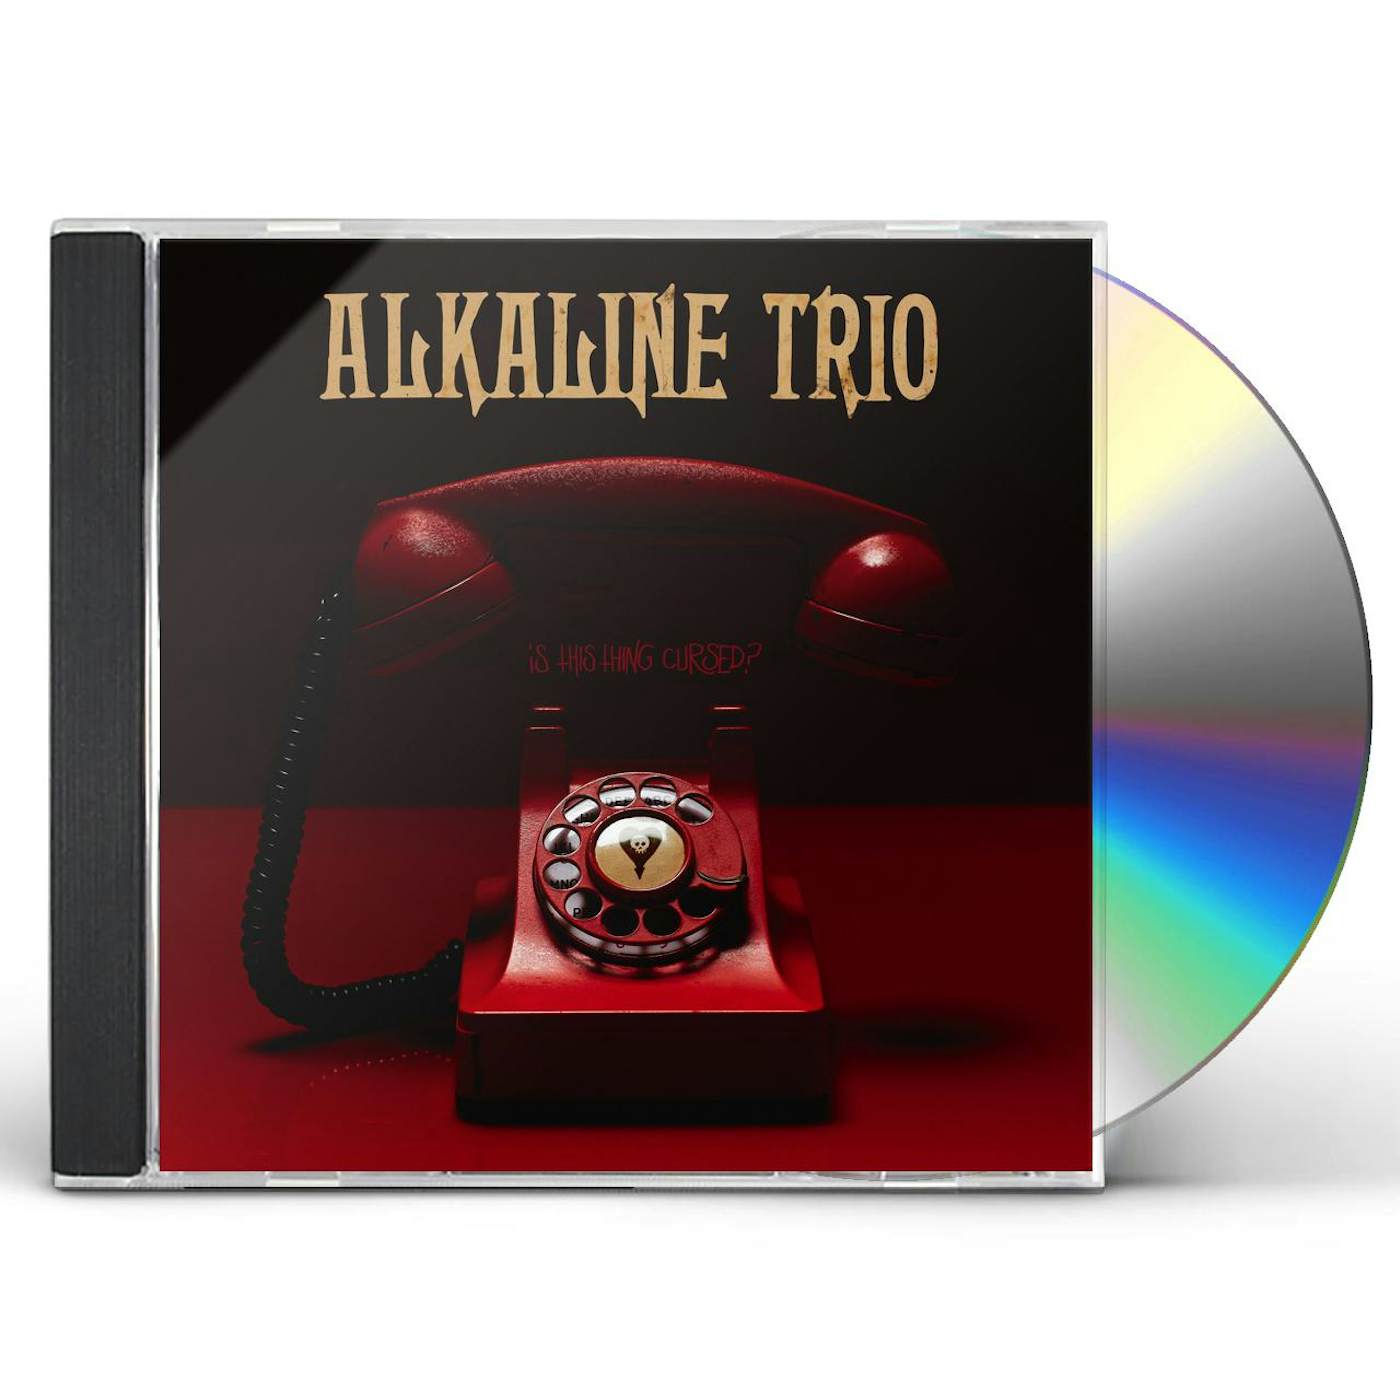 Alkaline Trio IS THIS THING CURSED CD